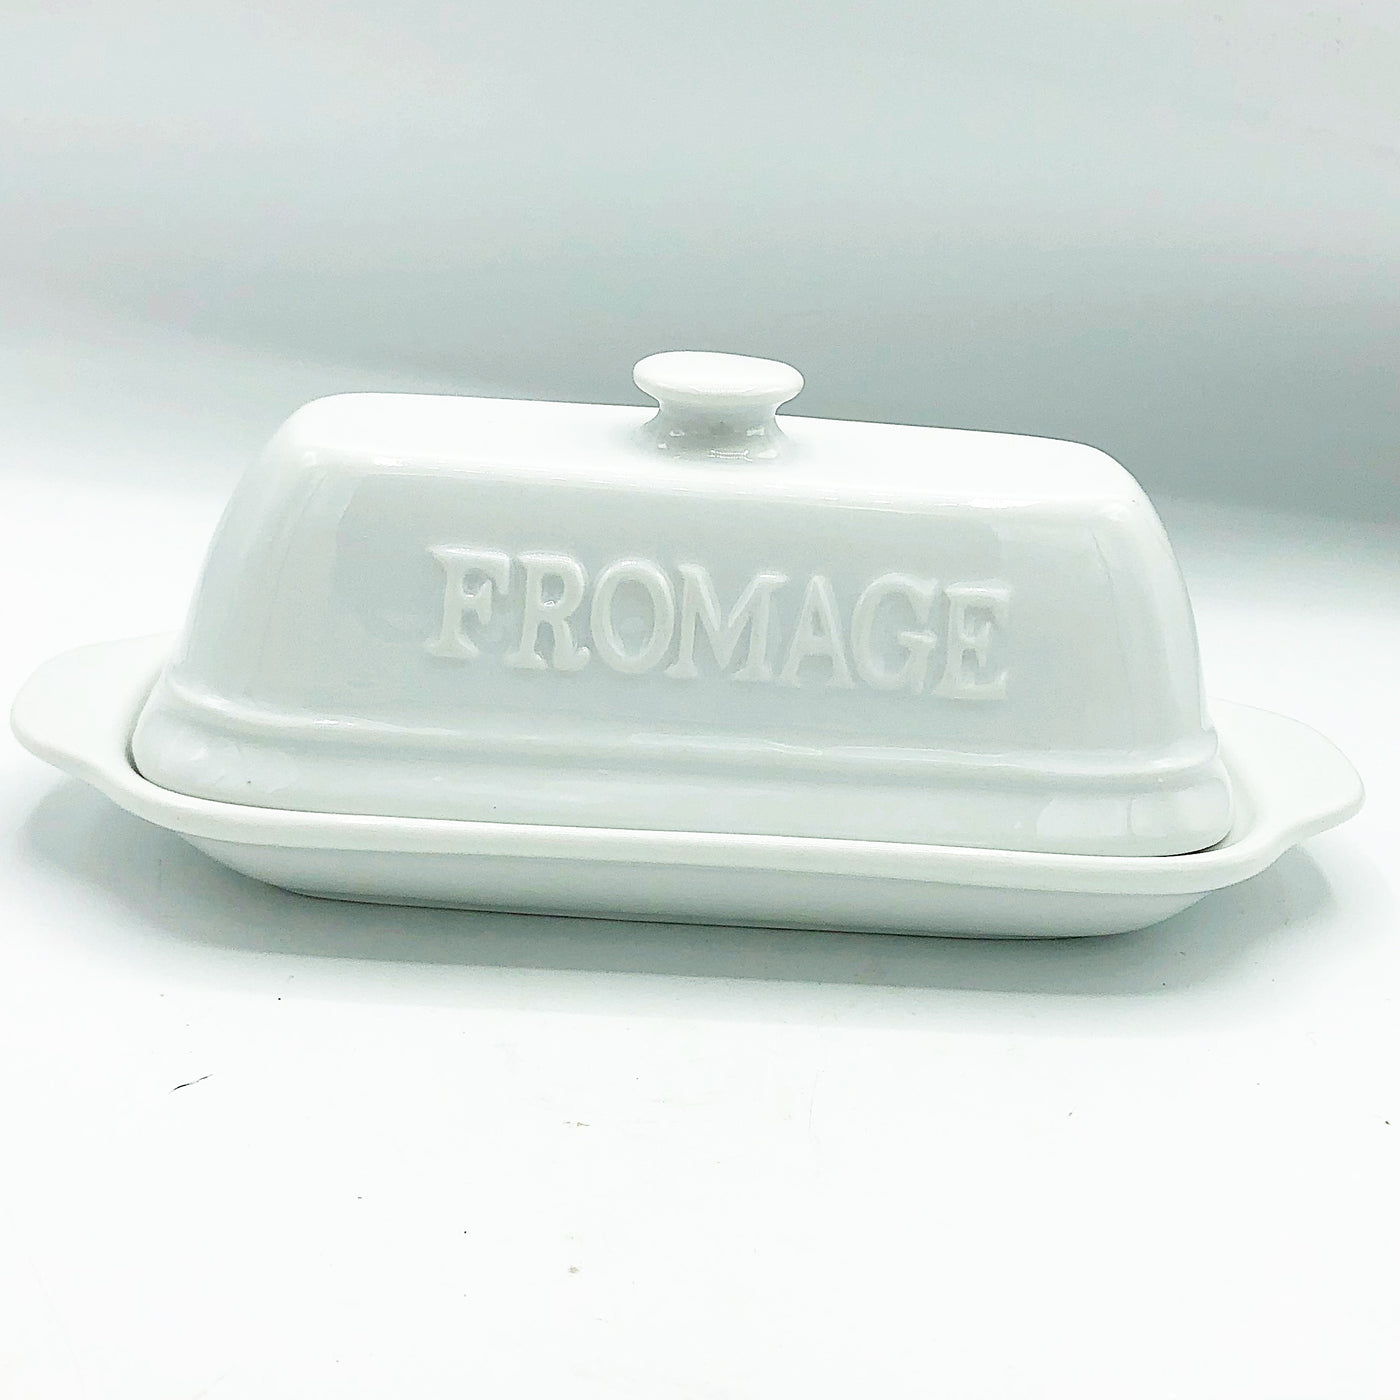 Gourmet Village Covered White Cheese Fromage Dish